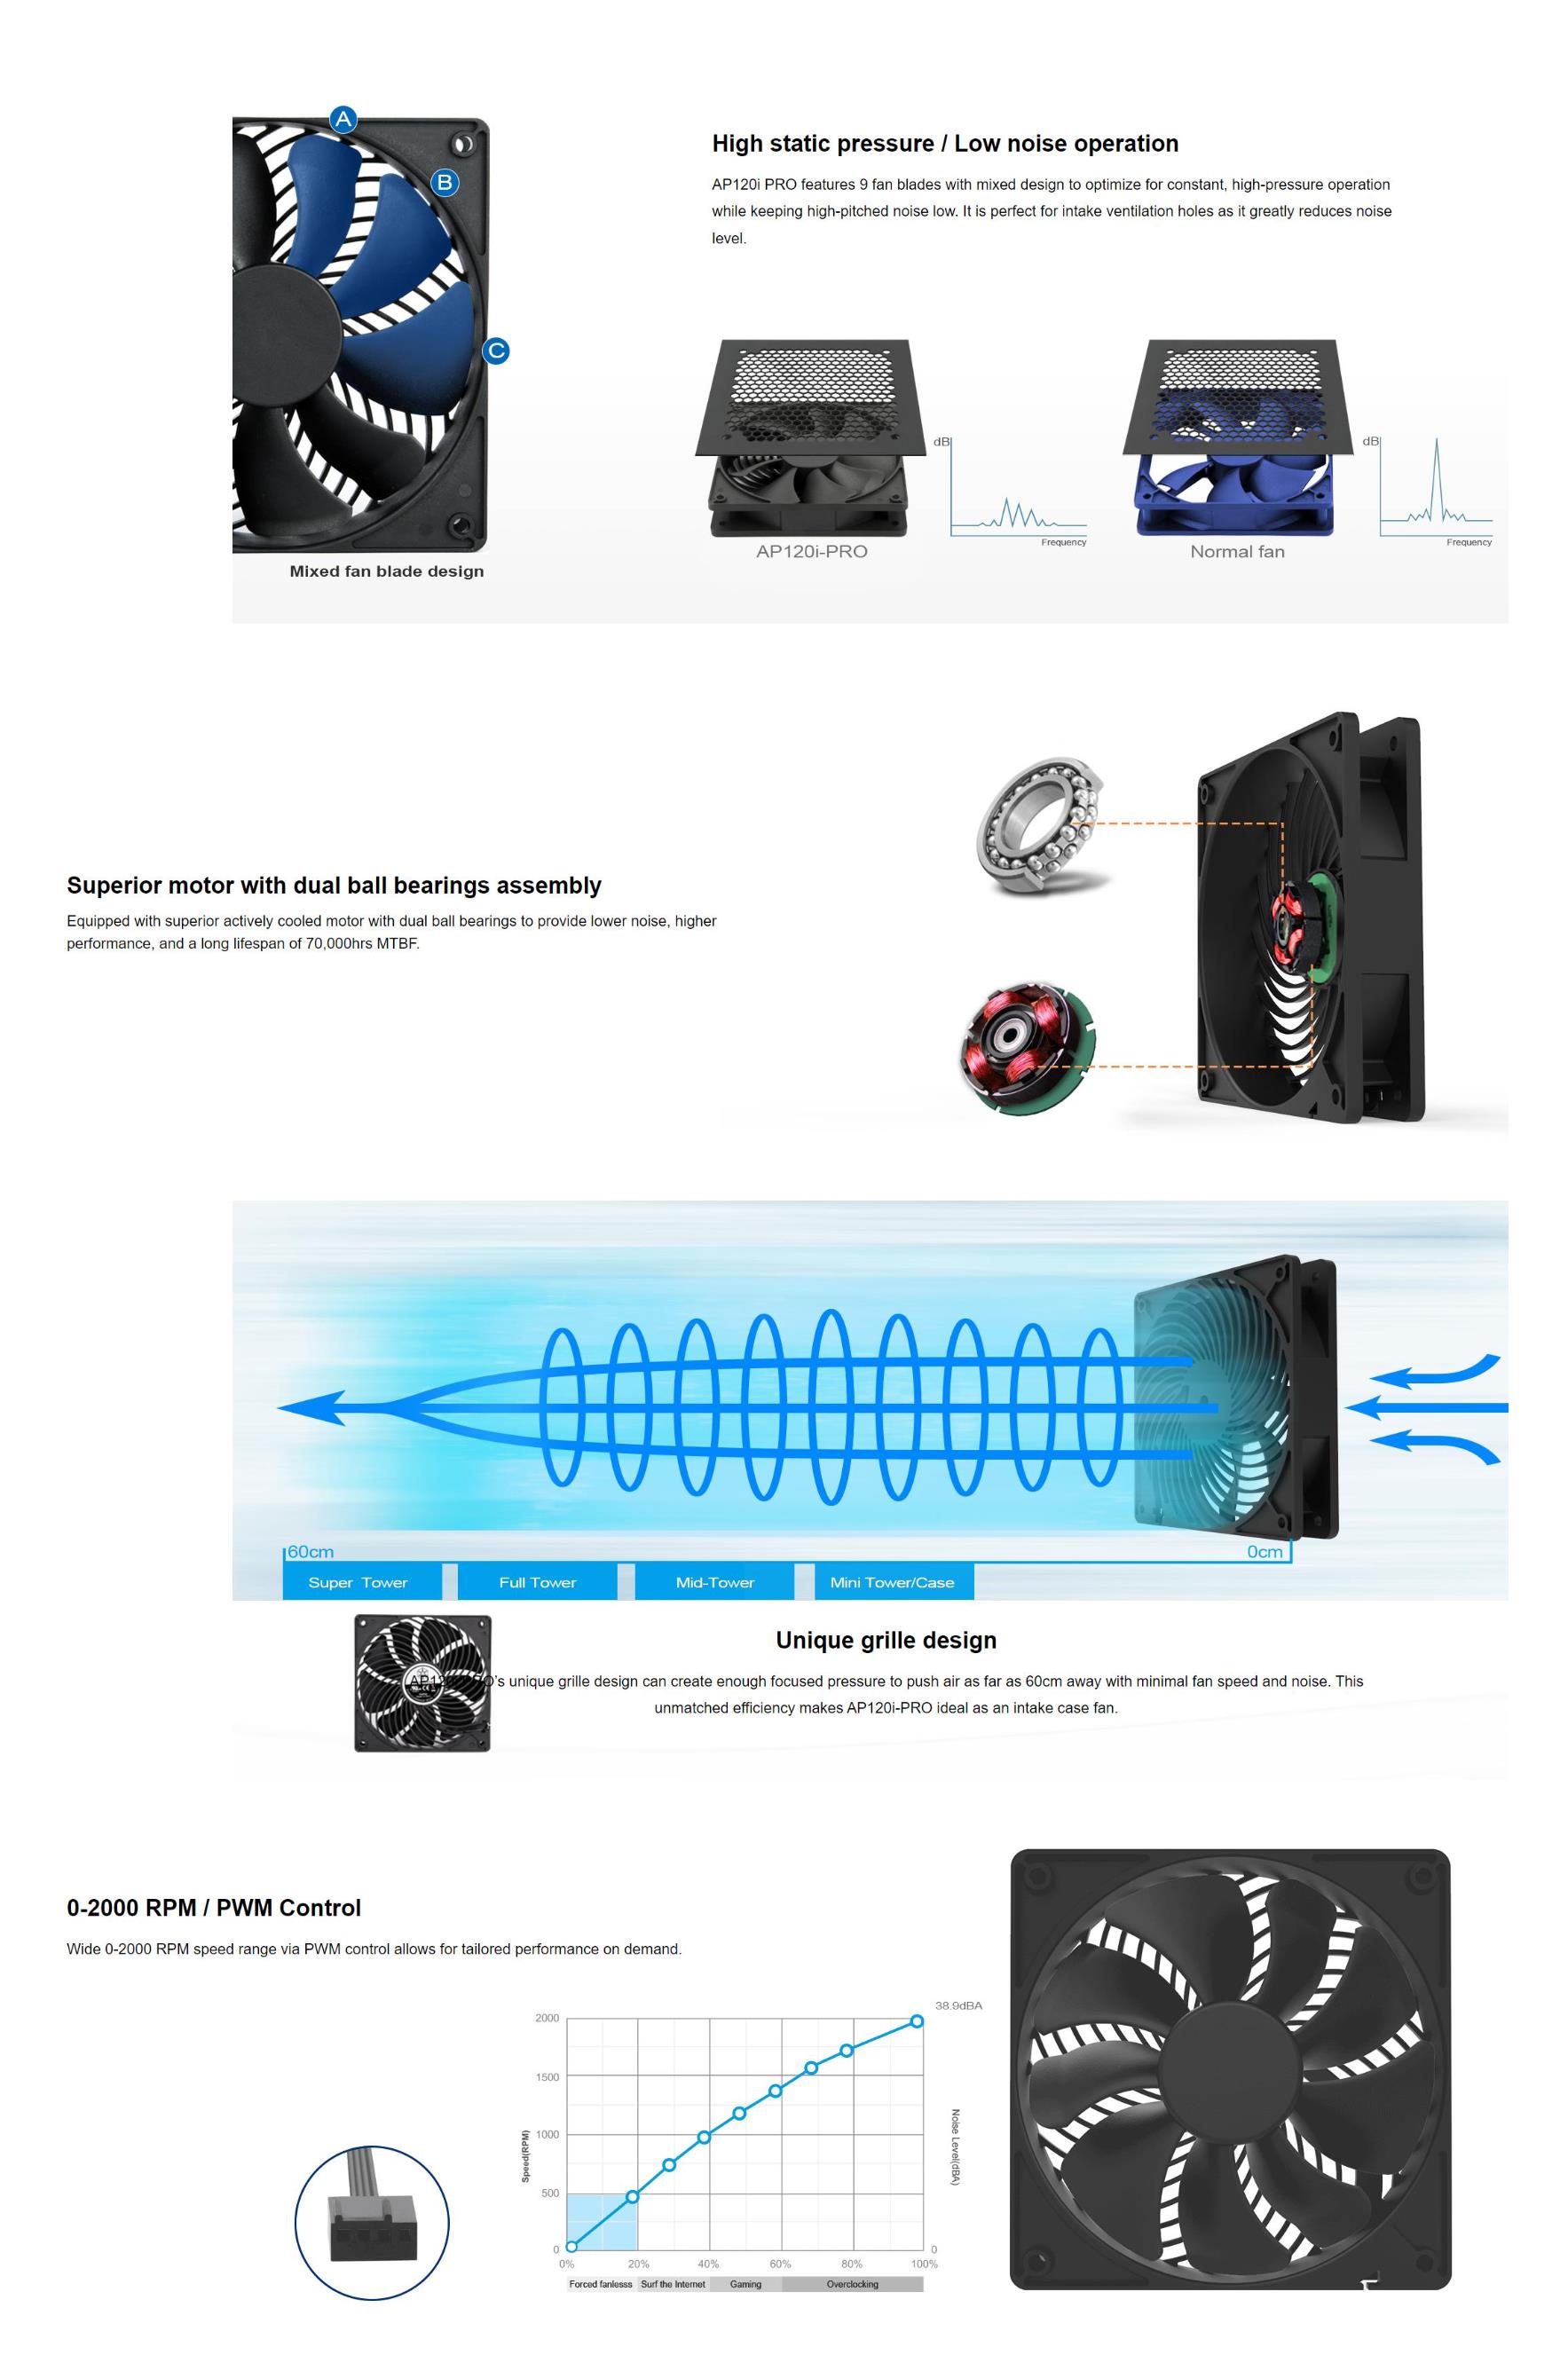 A large marketing image providing additional information about the product SilverStone Air Penetrator 120i PRO 120mm PWM Cooling Fan  - Additional alt info not provided